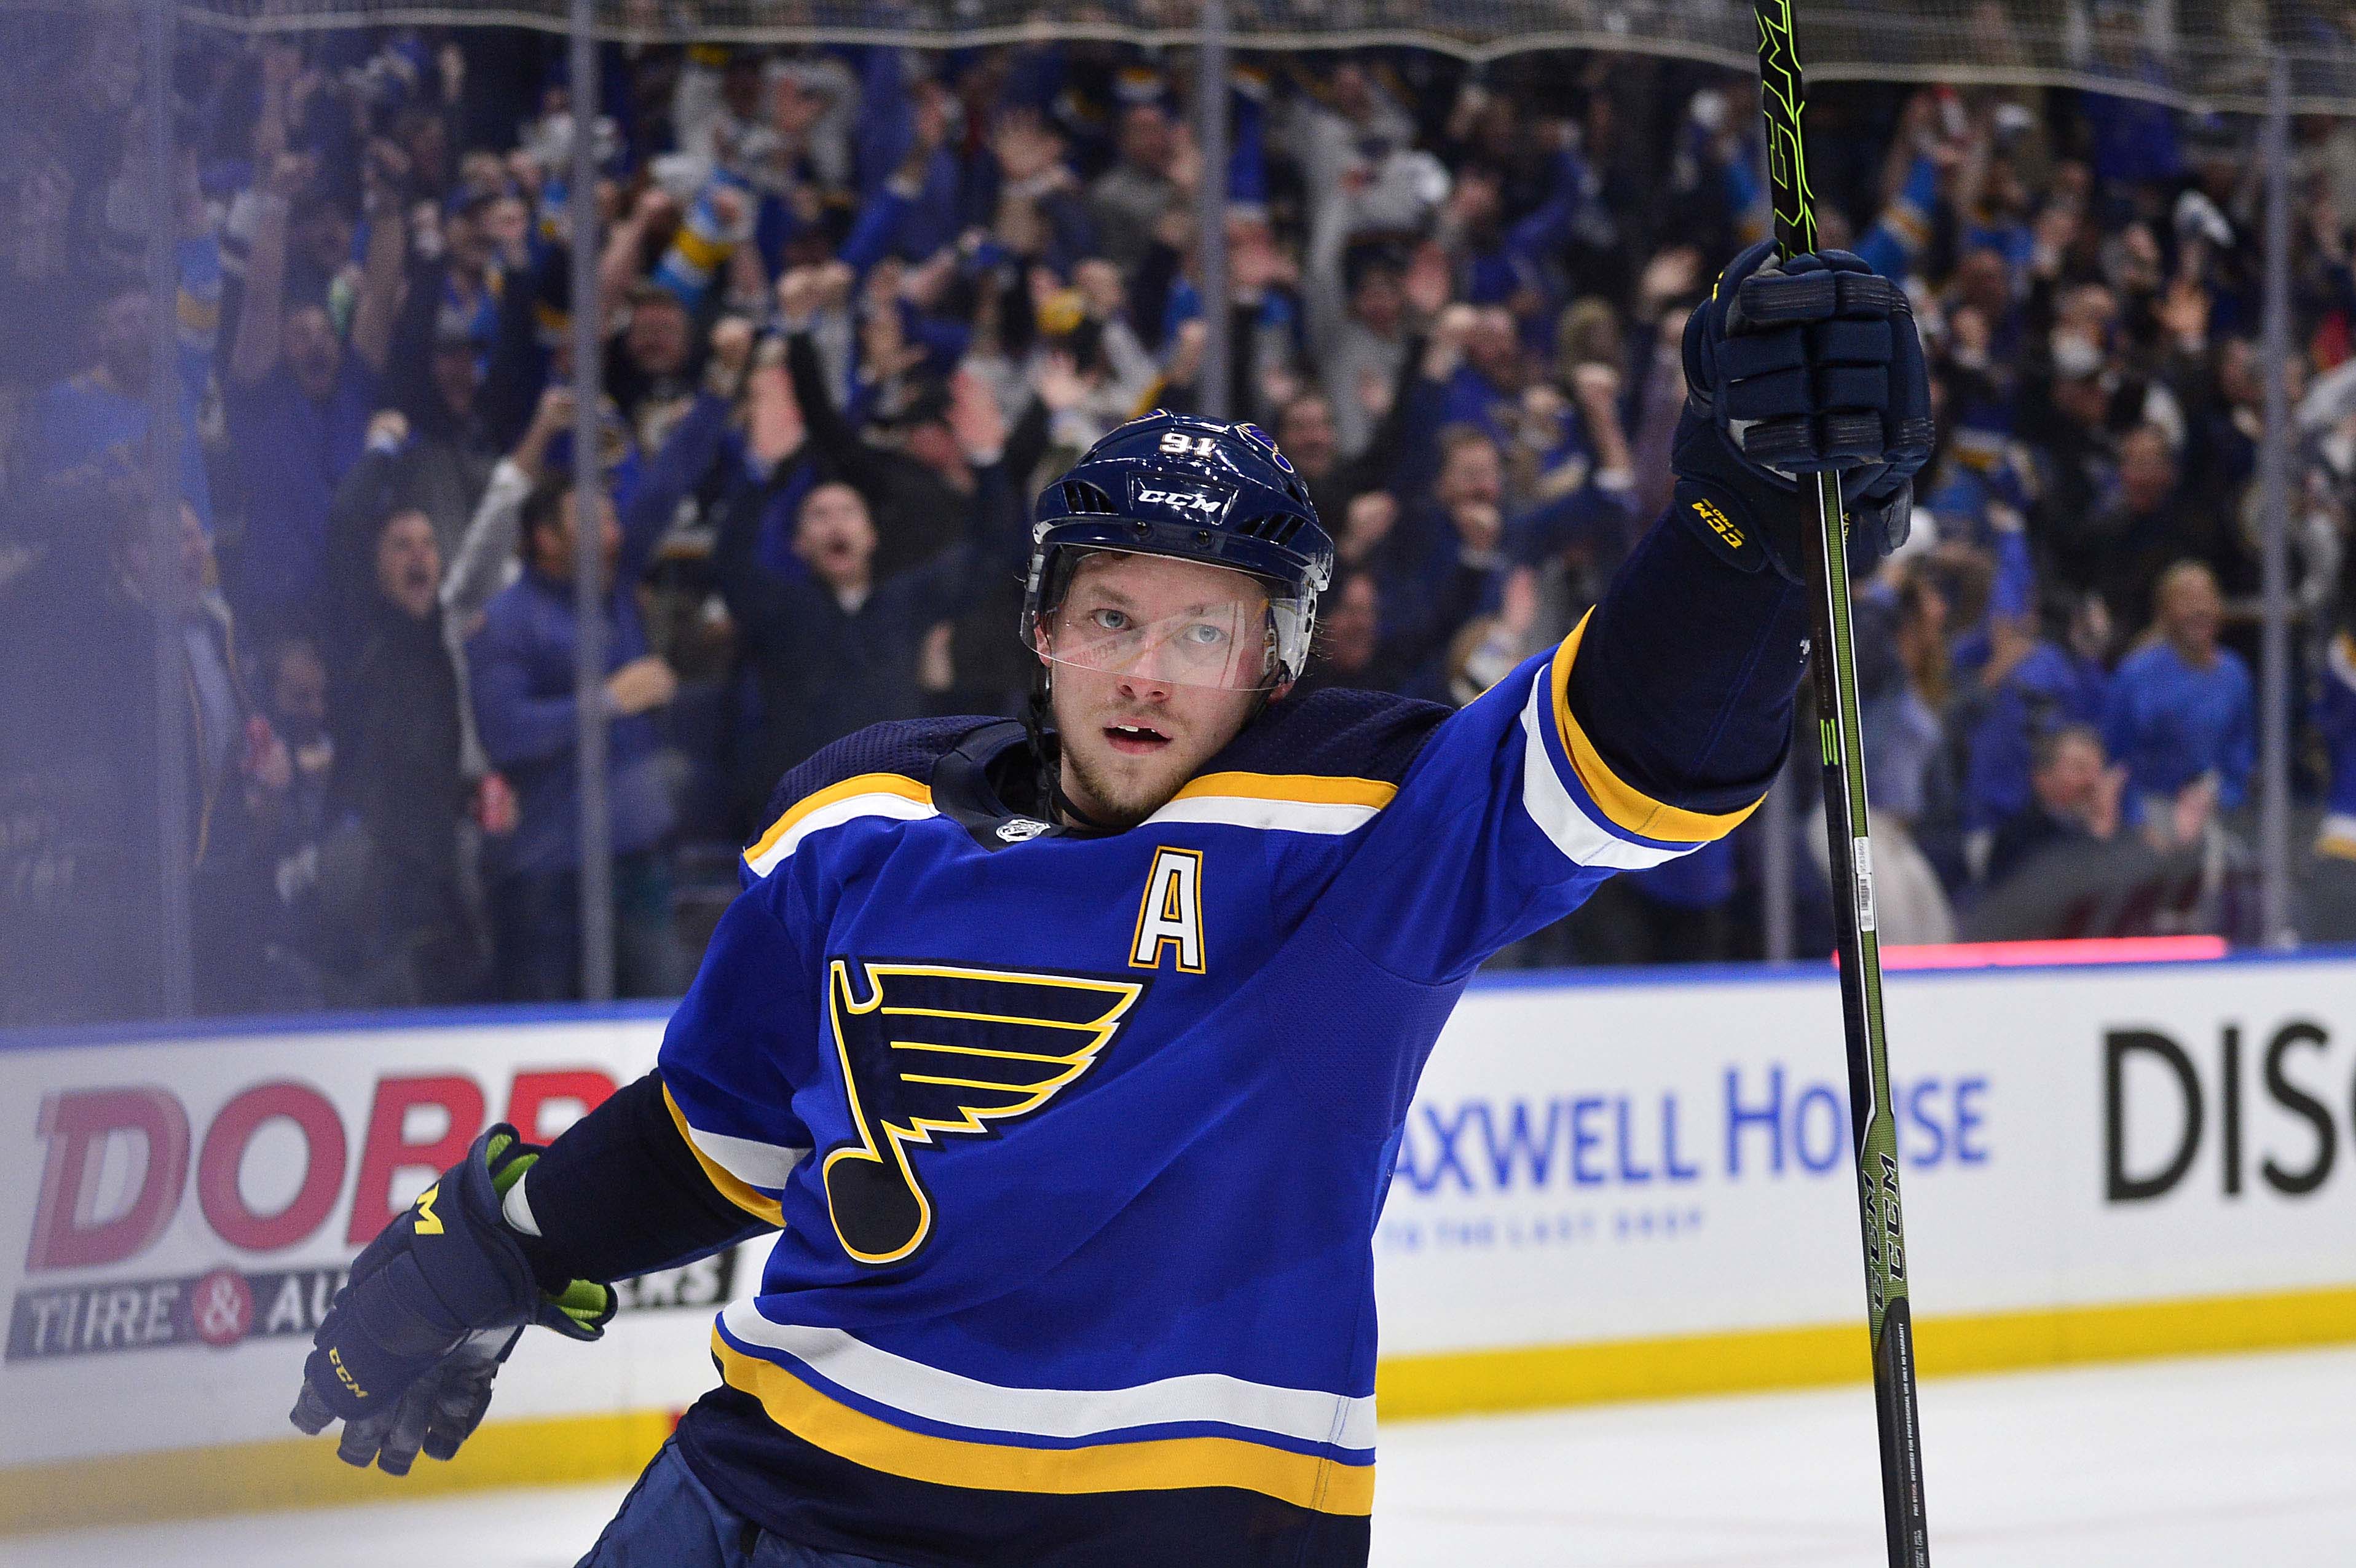 Apr 25, 2019; St. Louis, MO, USA; St. Louis Blues right wing Vladimir Tarasenko (91) celebrates after scoring against Dallas Stars goaltender Ben Bishop (not pictured) during the second period in game one of the second round of the 2019 Stanley Cup Playof